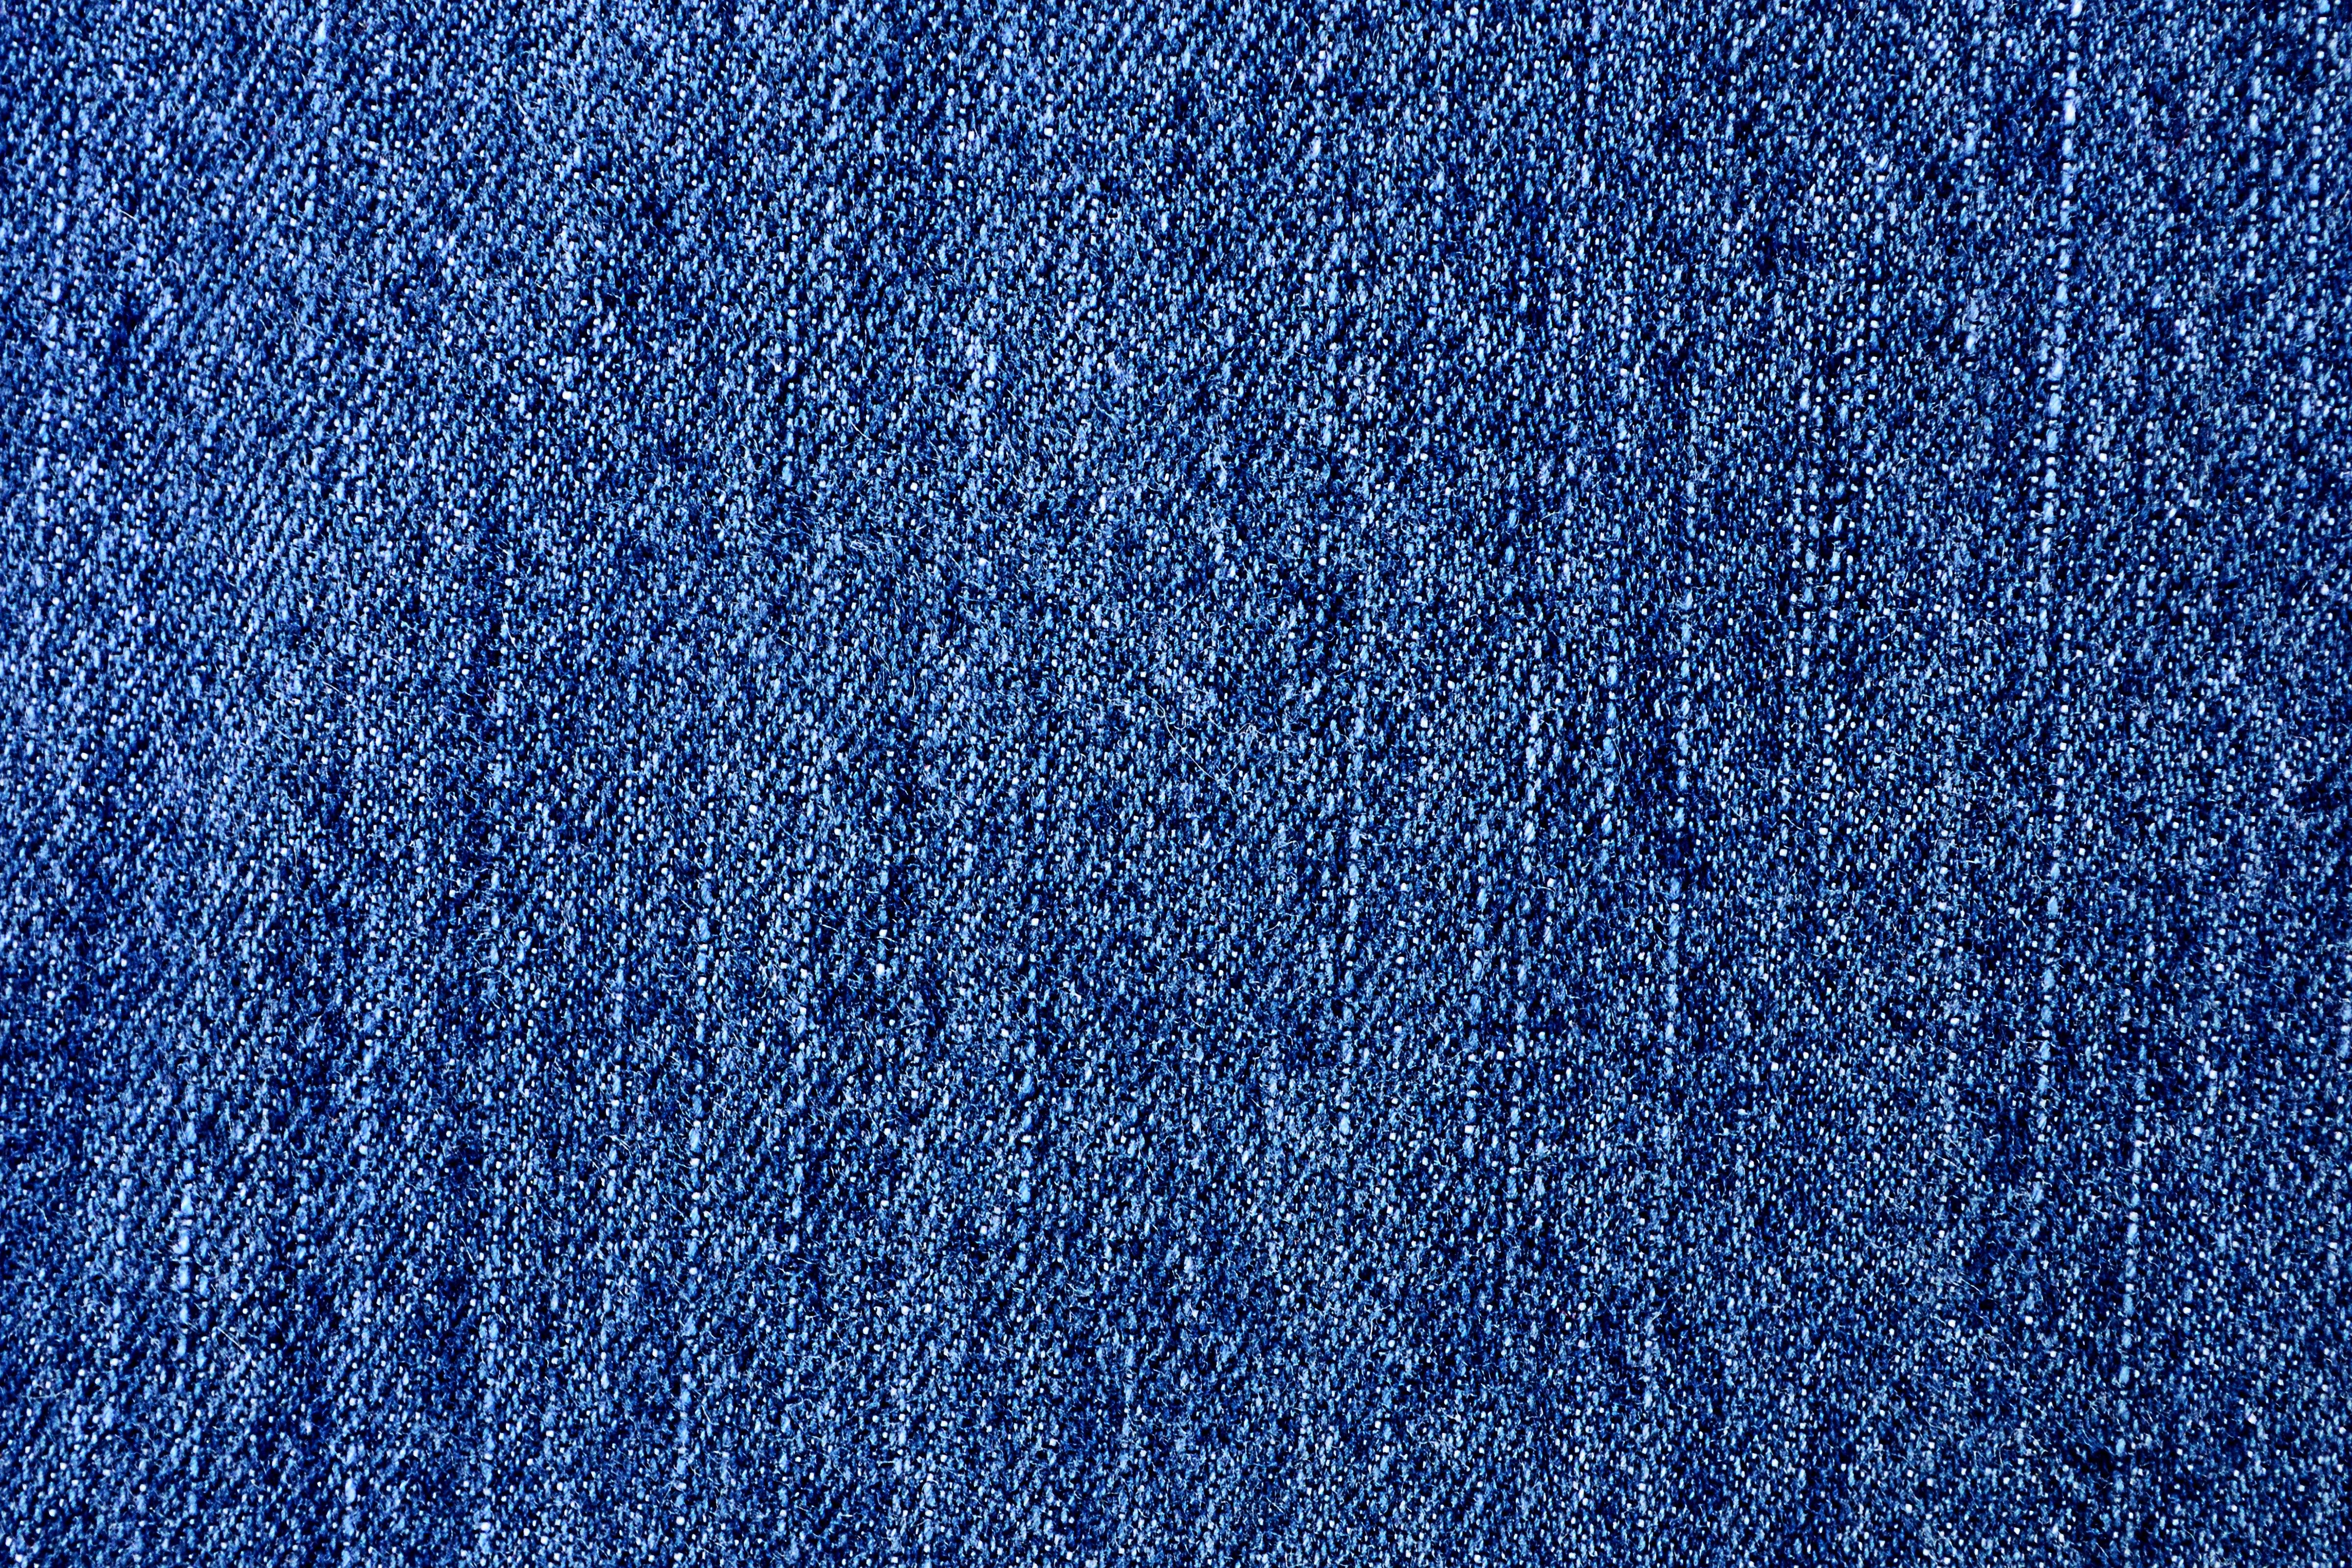 Jeans Wallpaper Top Background